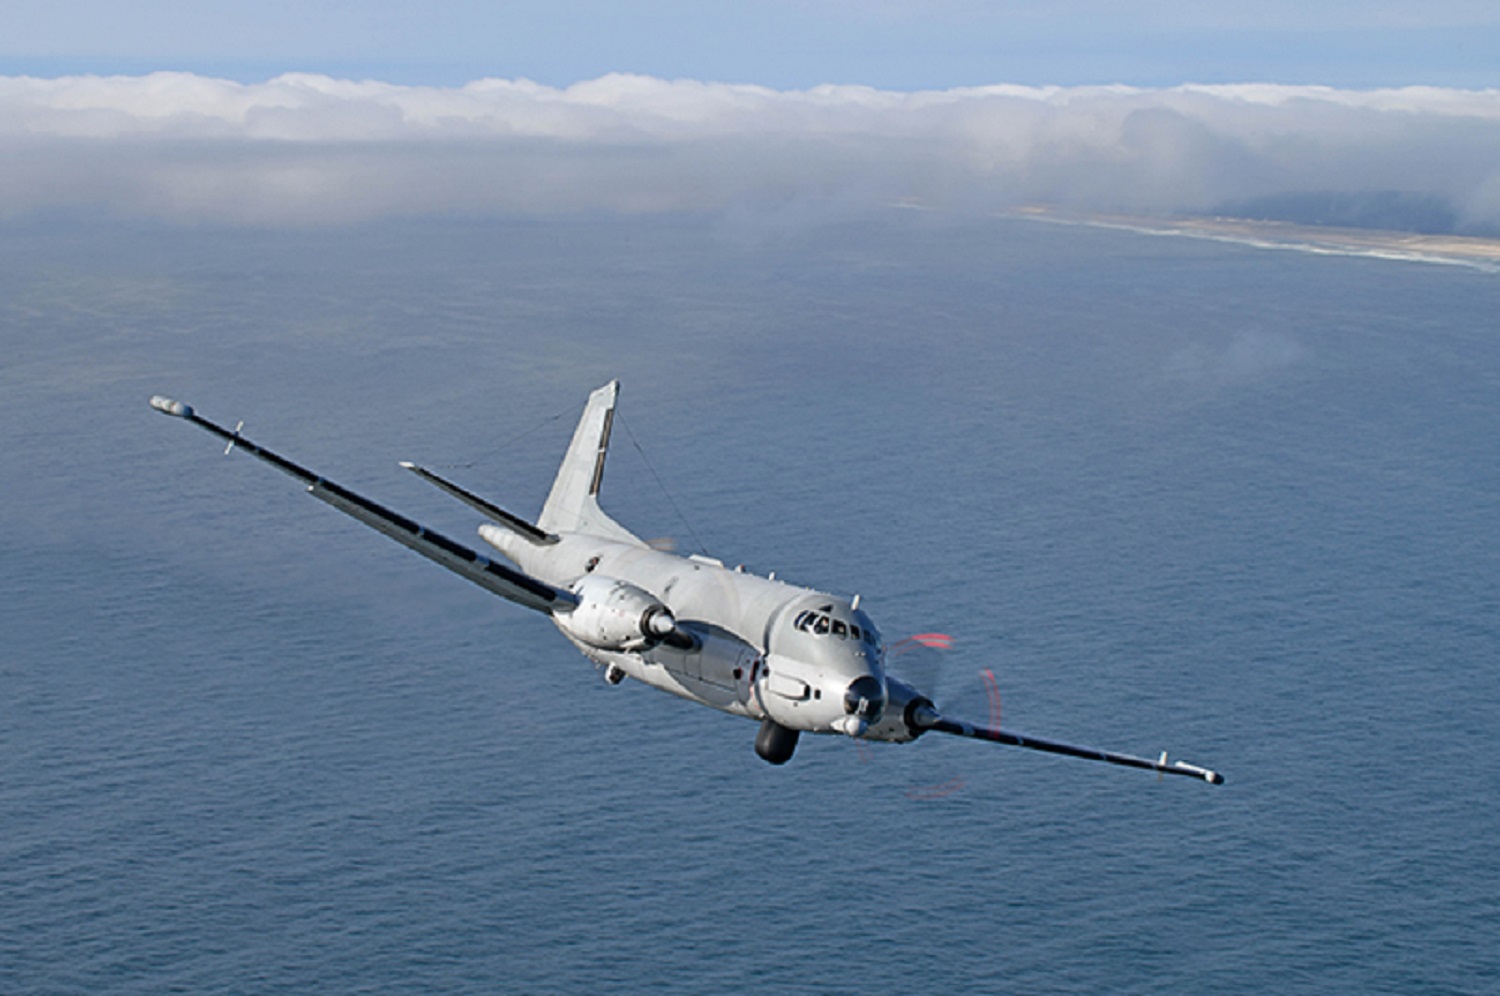 ATL2 Maritime Patrol Aircraft as a Testbed for SEARCHMASTER’s AI Functions